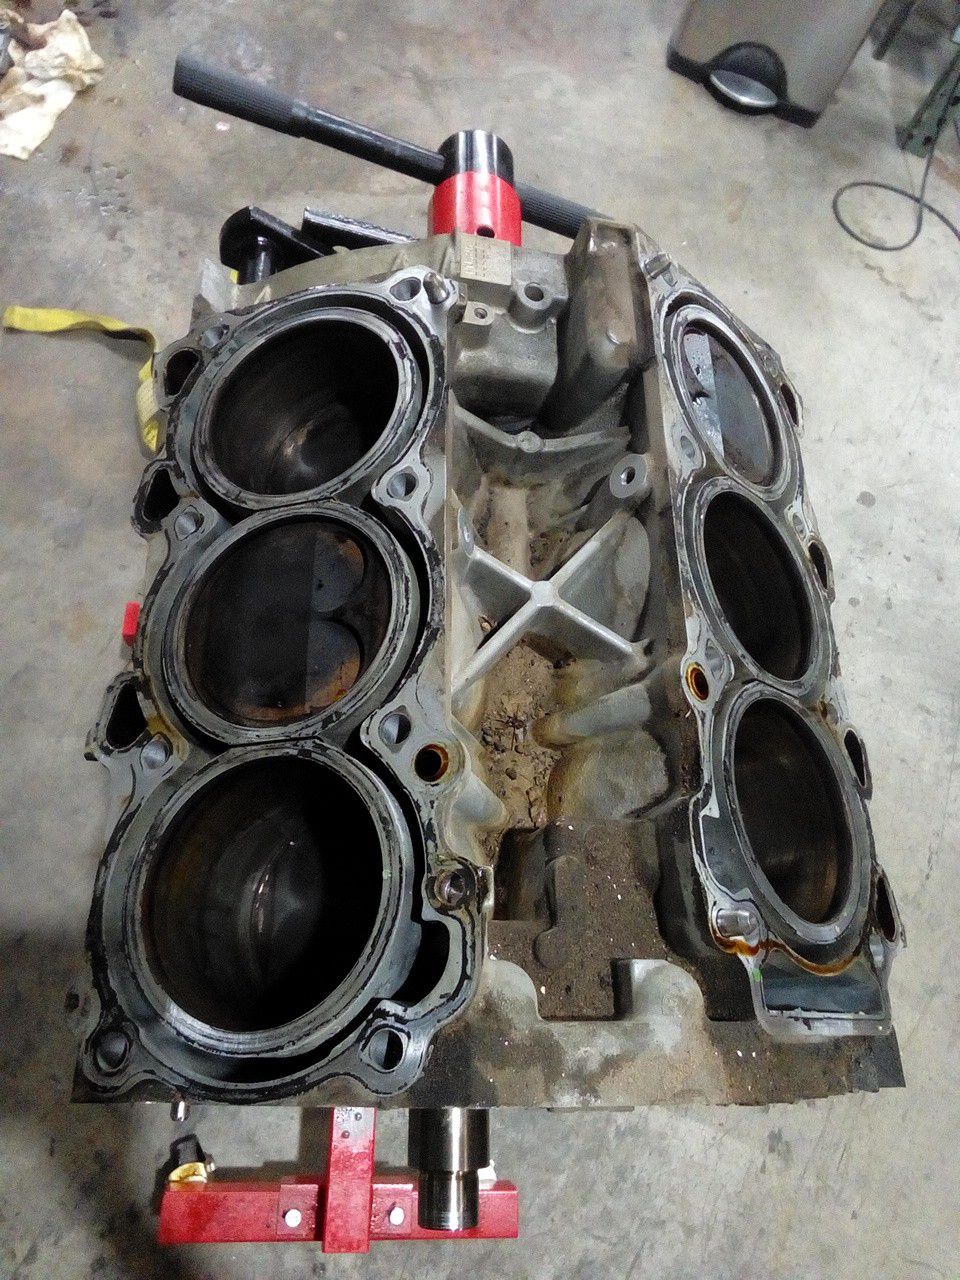 Infiniti Nissan VQ37VHR bottom end short block and other parts G37 370z